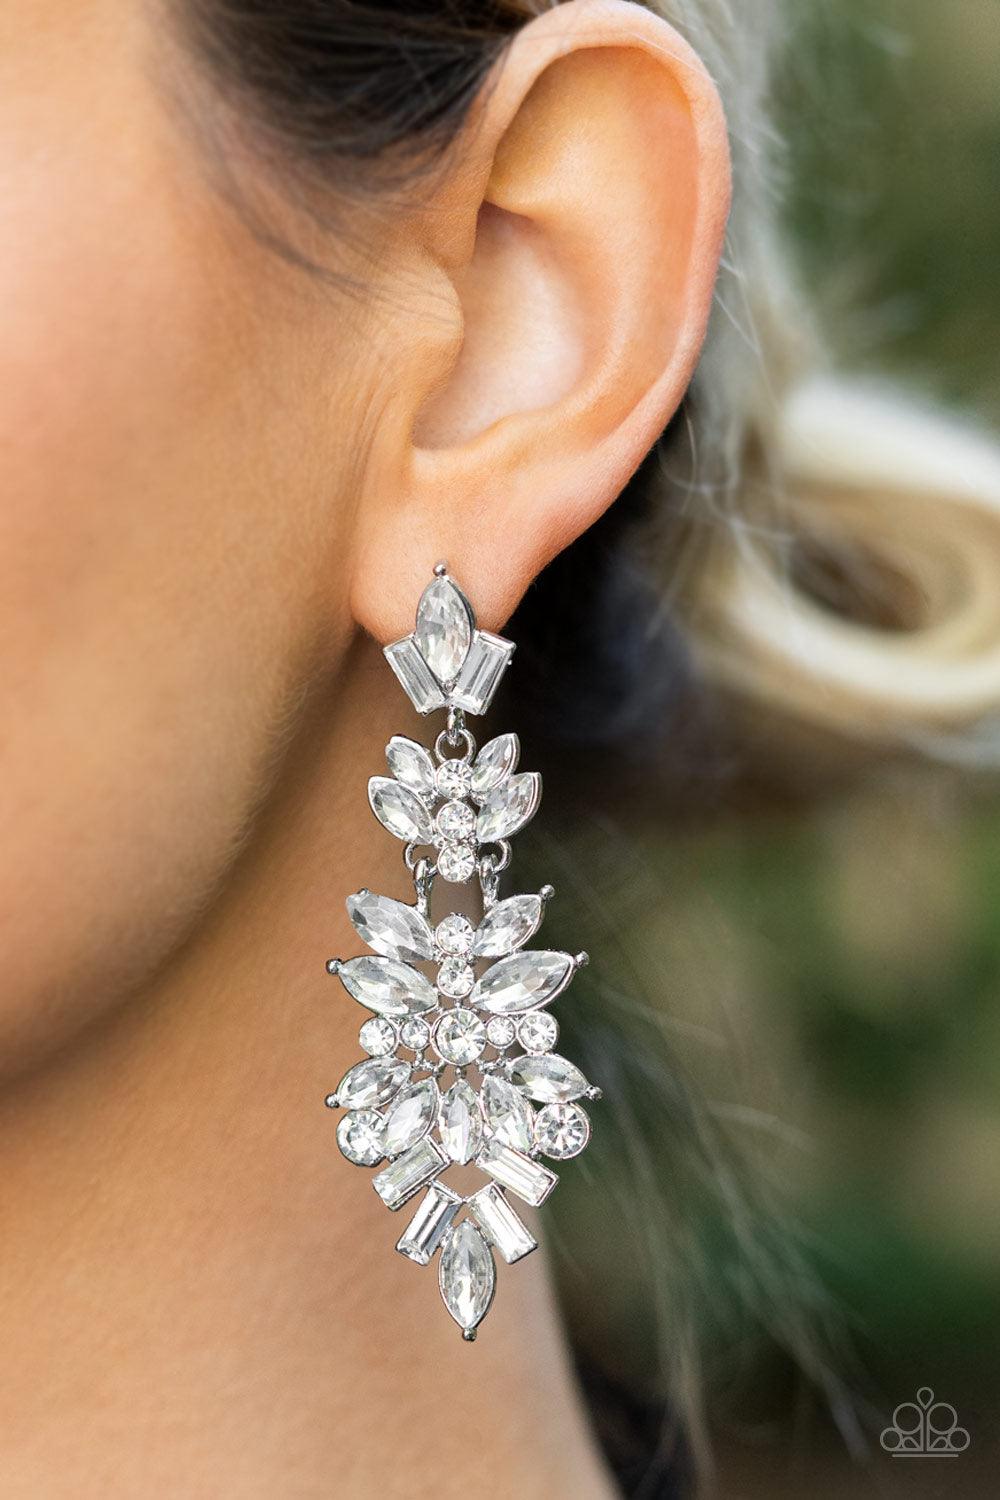 Paparazzi Accessories Frozen Fairytale - White Trestles of round, marquise, and emerald cut rhinestones cluster into three sparkly segments as they link into a jaw-dropping lure, resulting in an icy statement piece. Earring attaches to a standard post fit